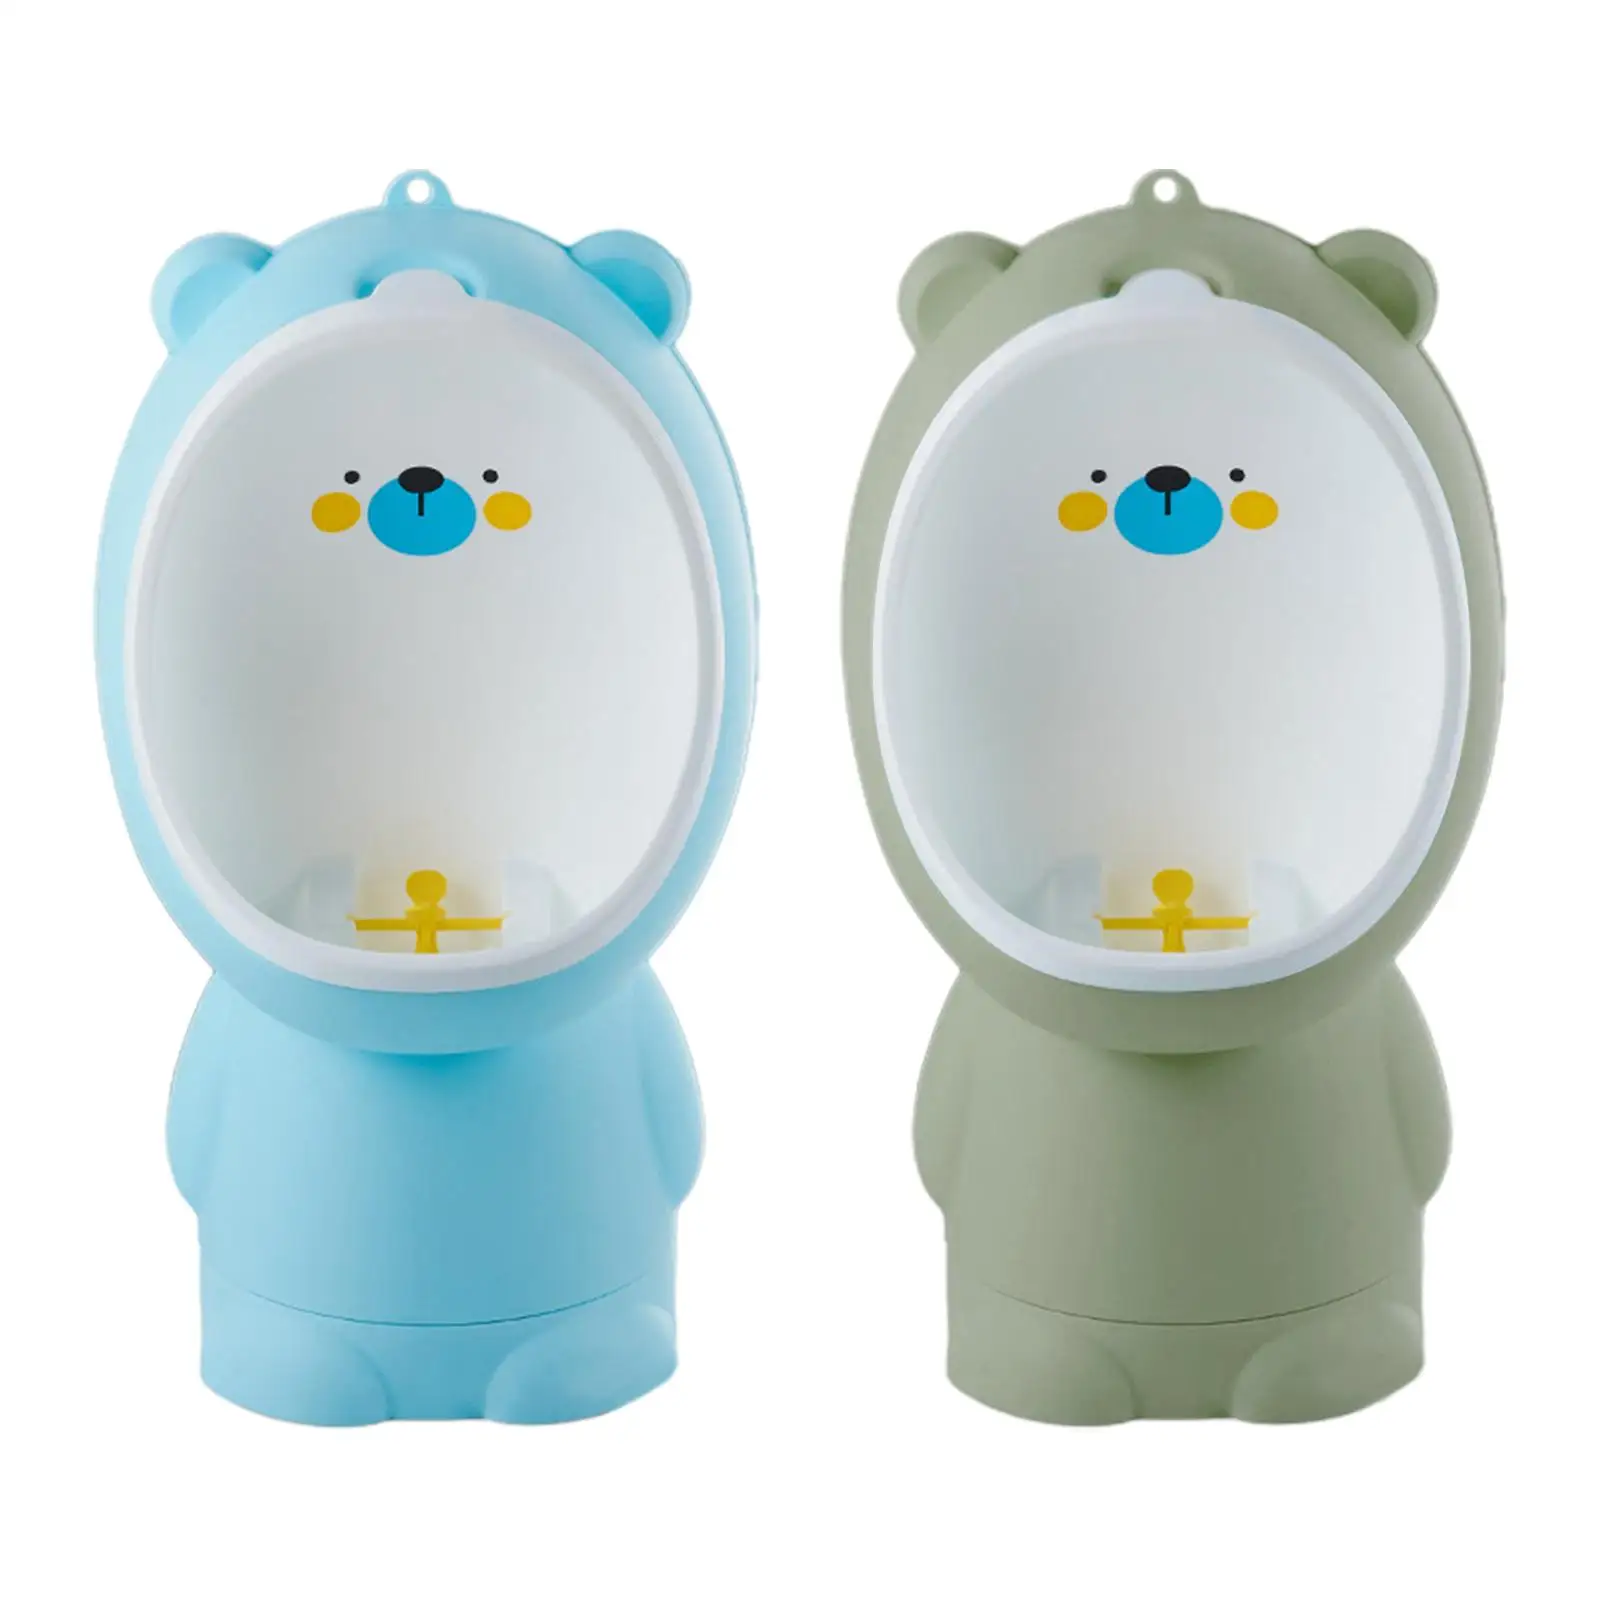 Urinals Toilet Training, Standing Potty with Aiming Target, Adjustable Height Potty Trainer, Urinal Hanging Pee Trainer